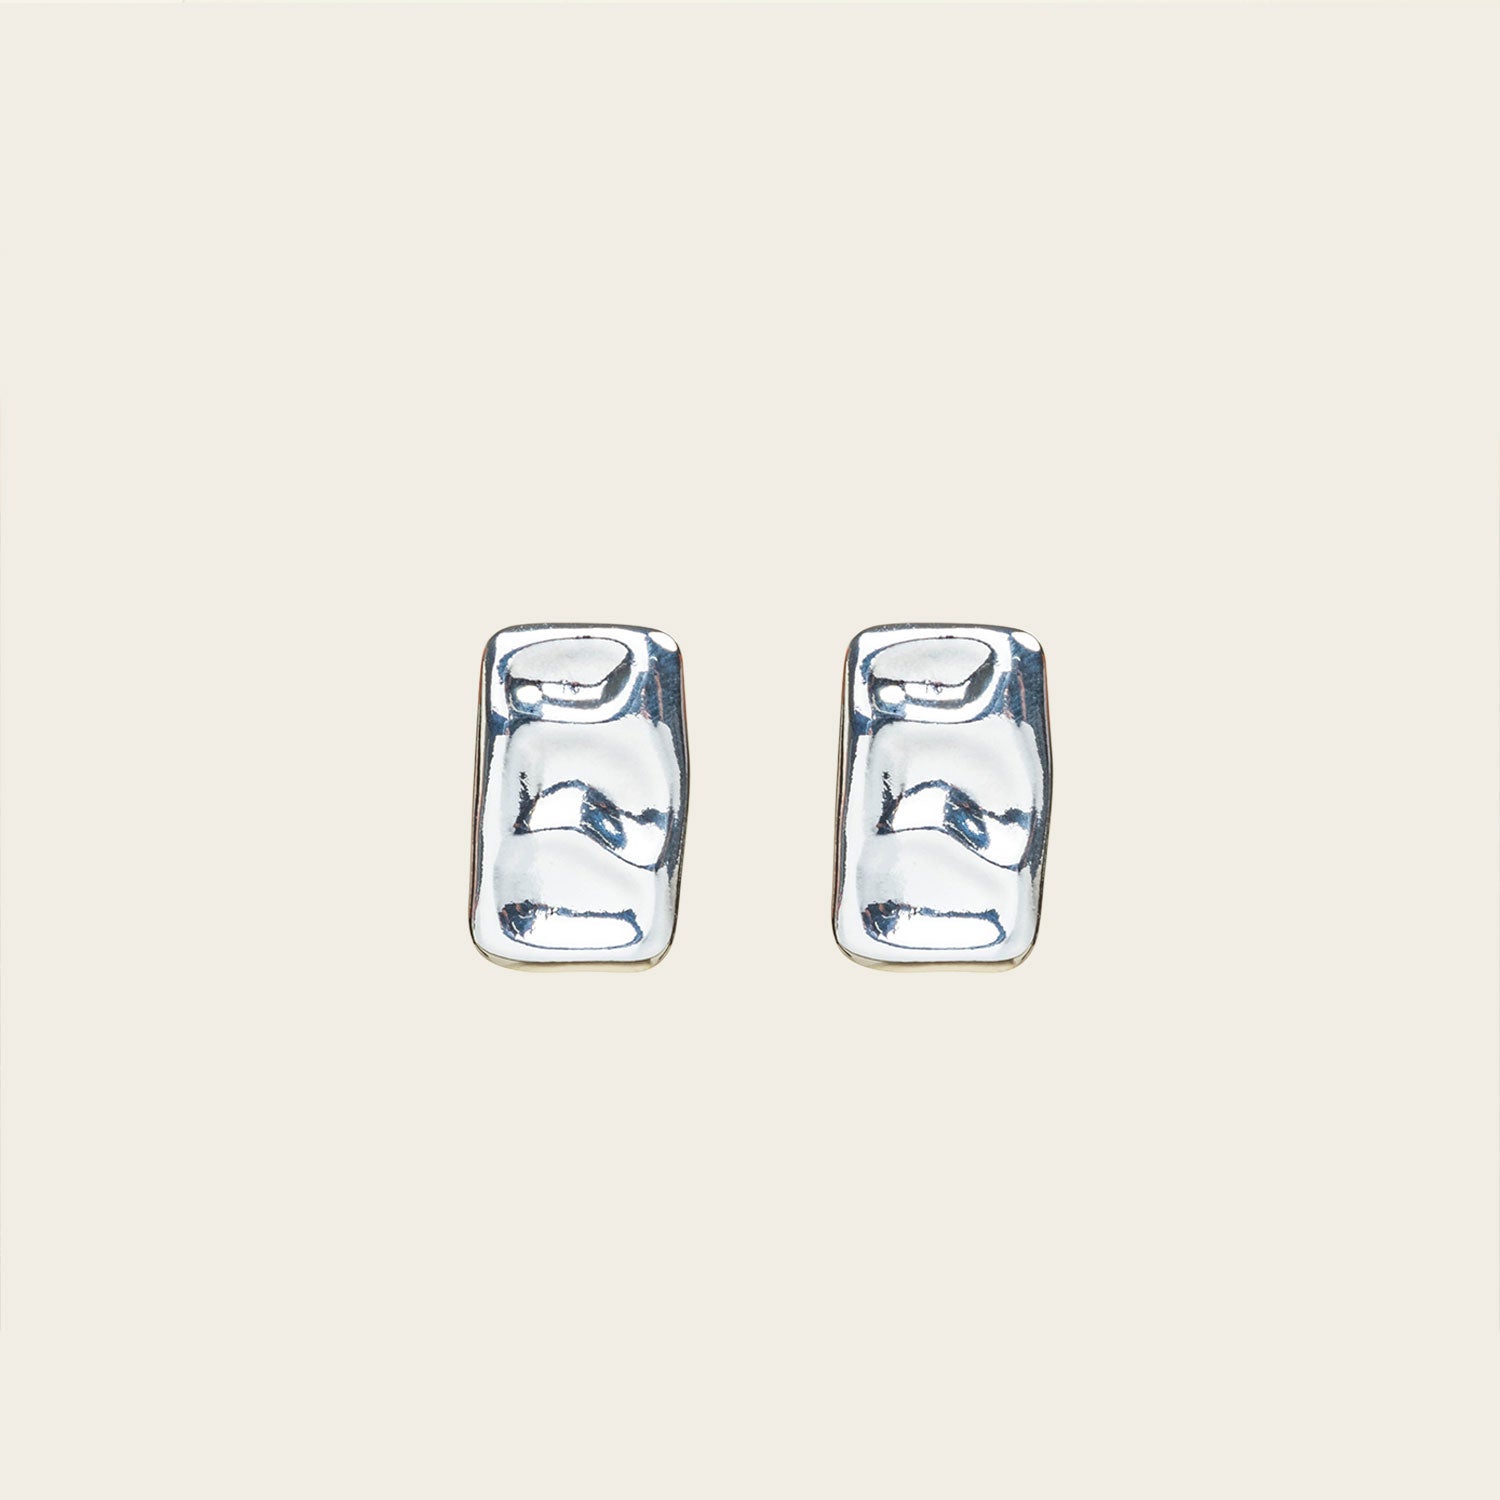 Image of the Nova Clip On Earrings in Silver feature a padded clip-on closure and are suitable for all ear types, including thick/large ears, thin/small ears, and even ears that are healing or stretched. Expect a secure and comfortable hold for 8 - 12 hours. Crafted using a silver tone copper alloy, this piece contains one pair of removable rubber-padded clip-on earrings.